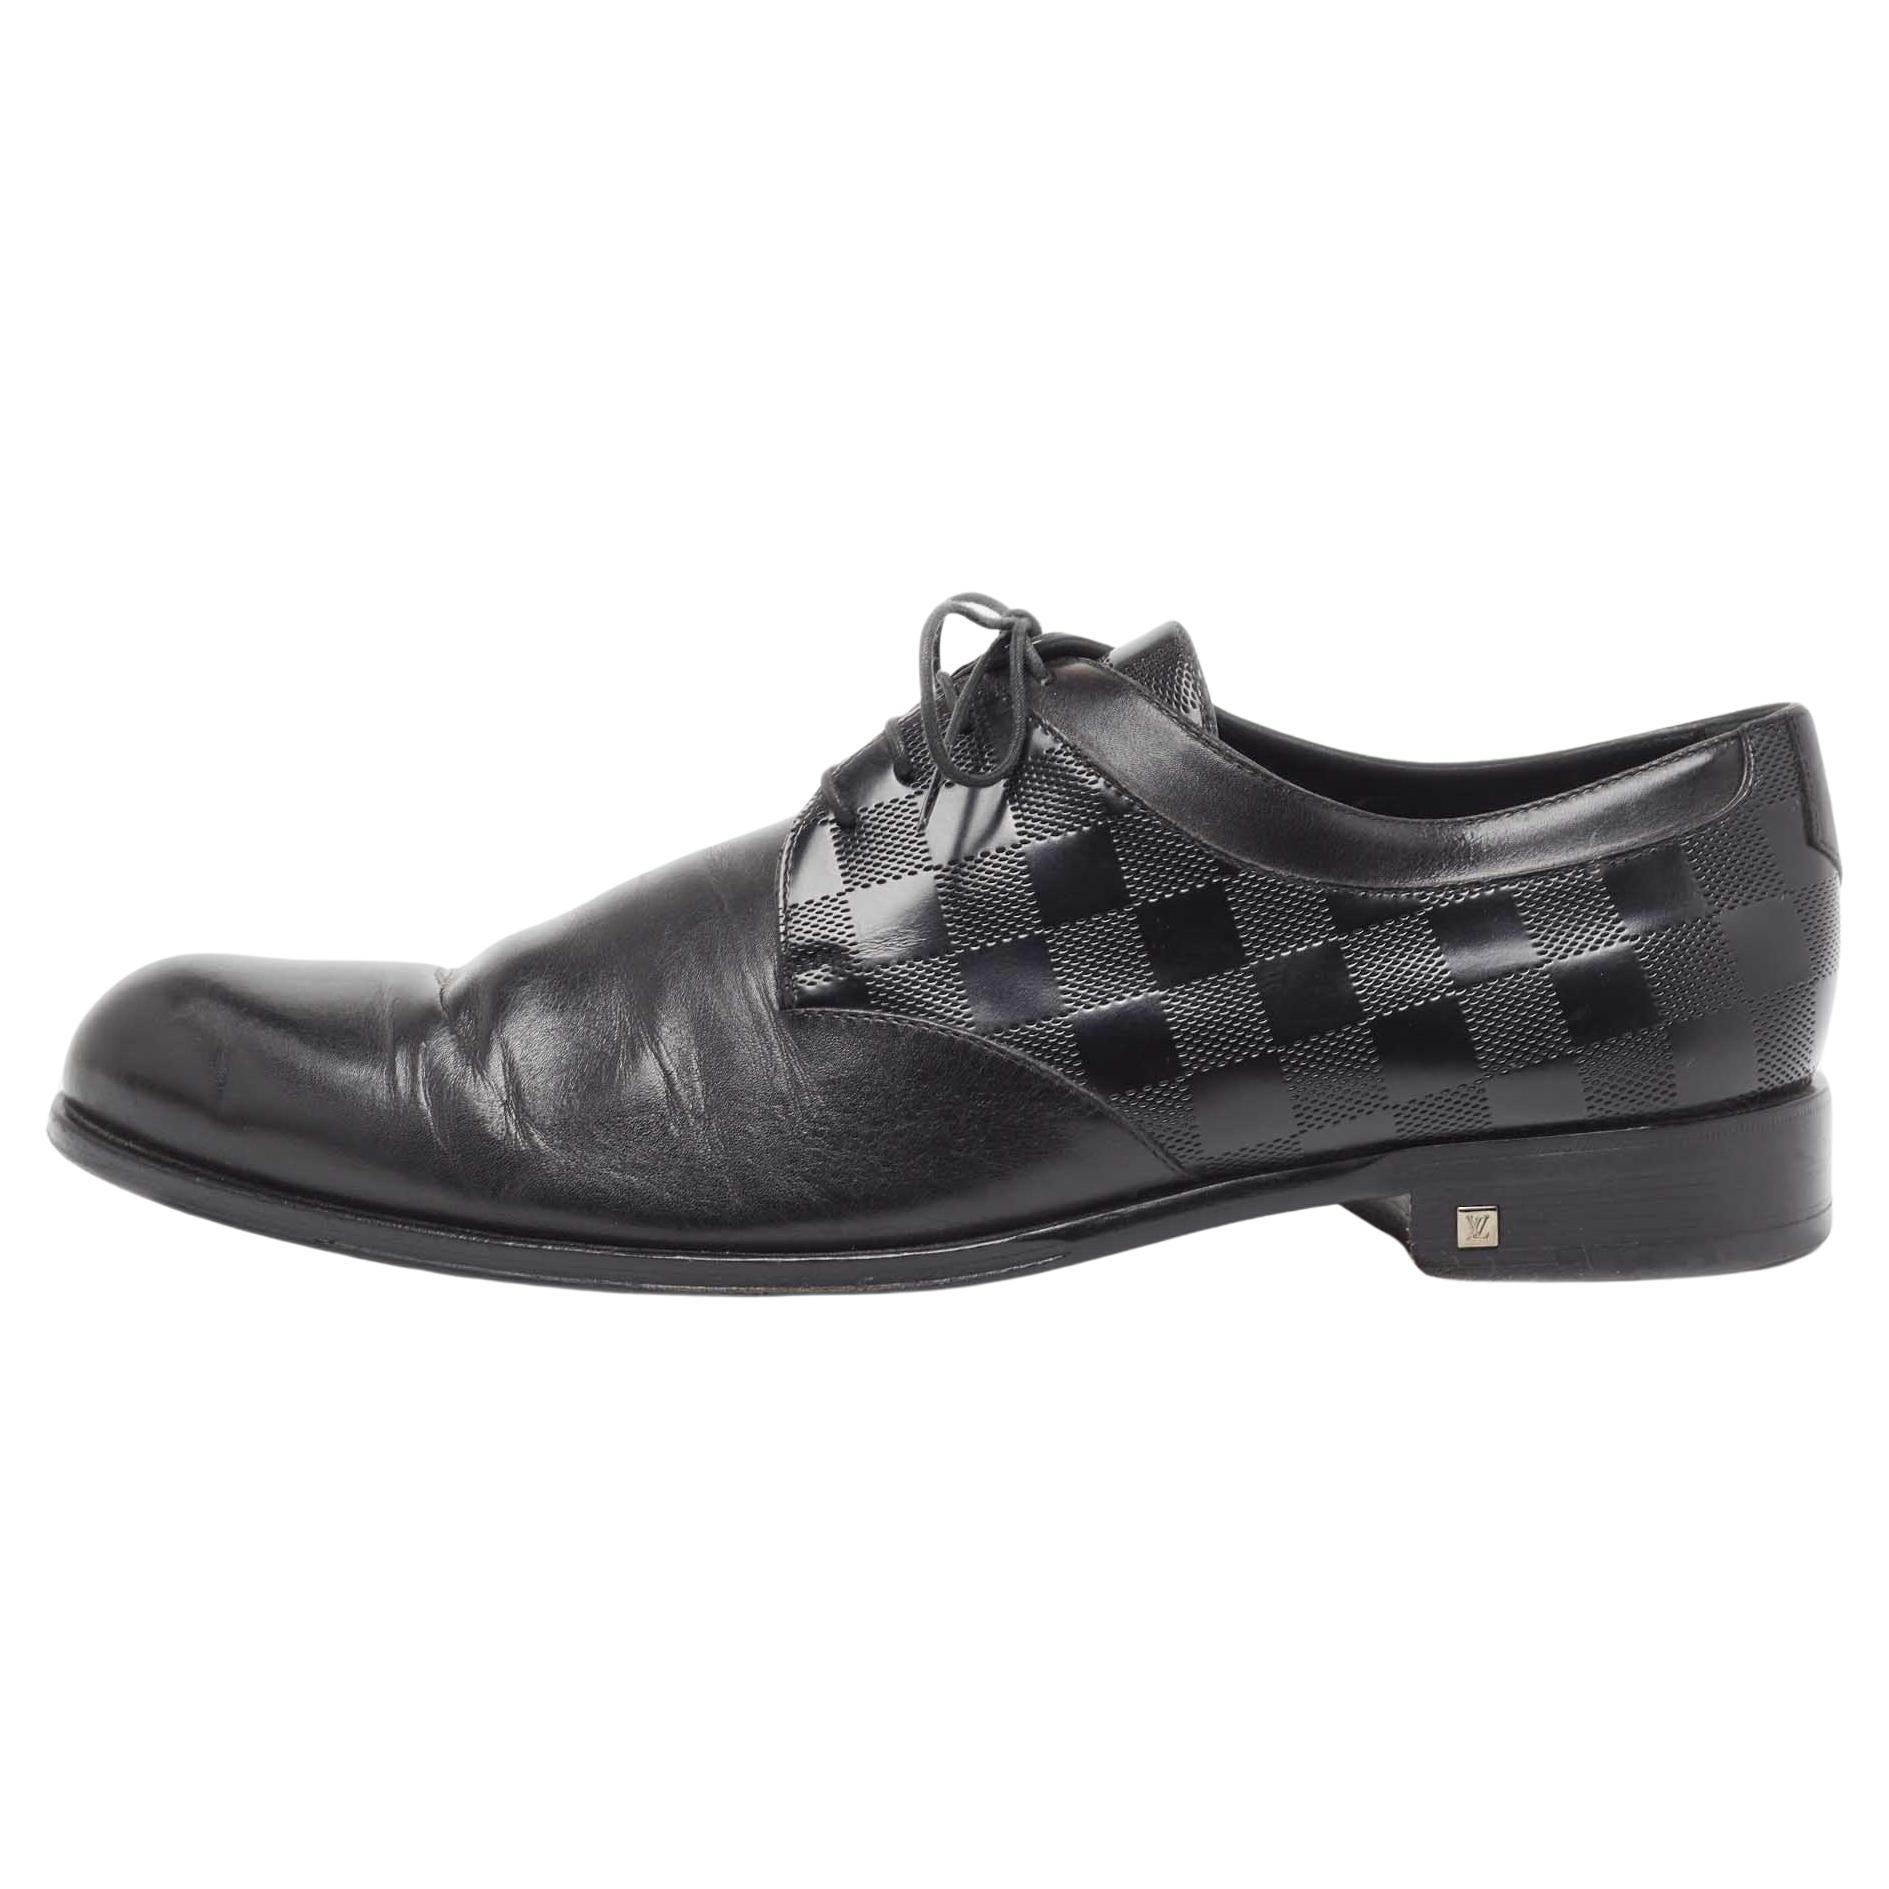 Louis Vuitton Black Damier Embossed Leather Lace Up Oxford Size 43 For Sale